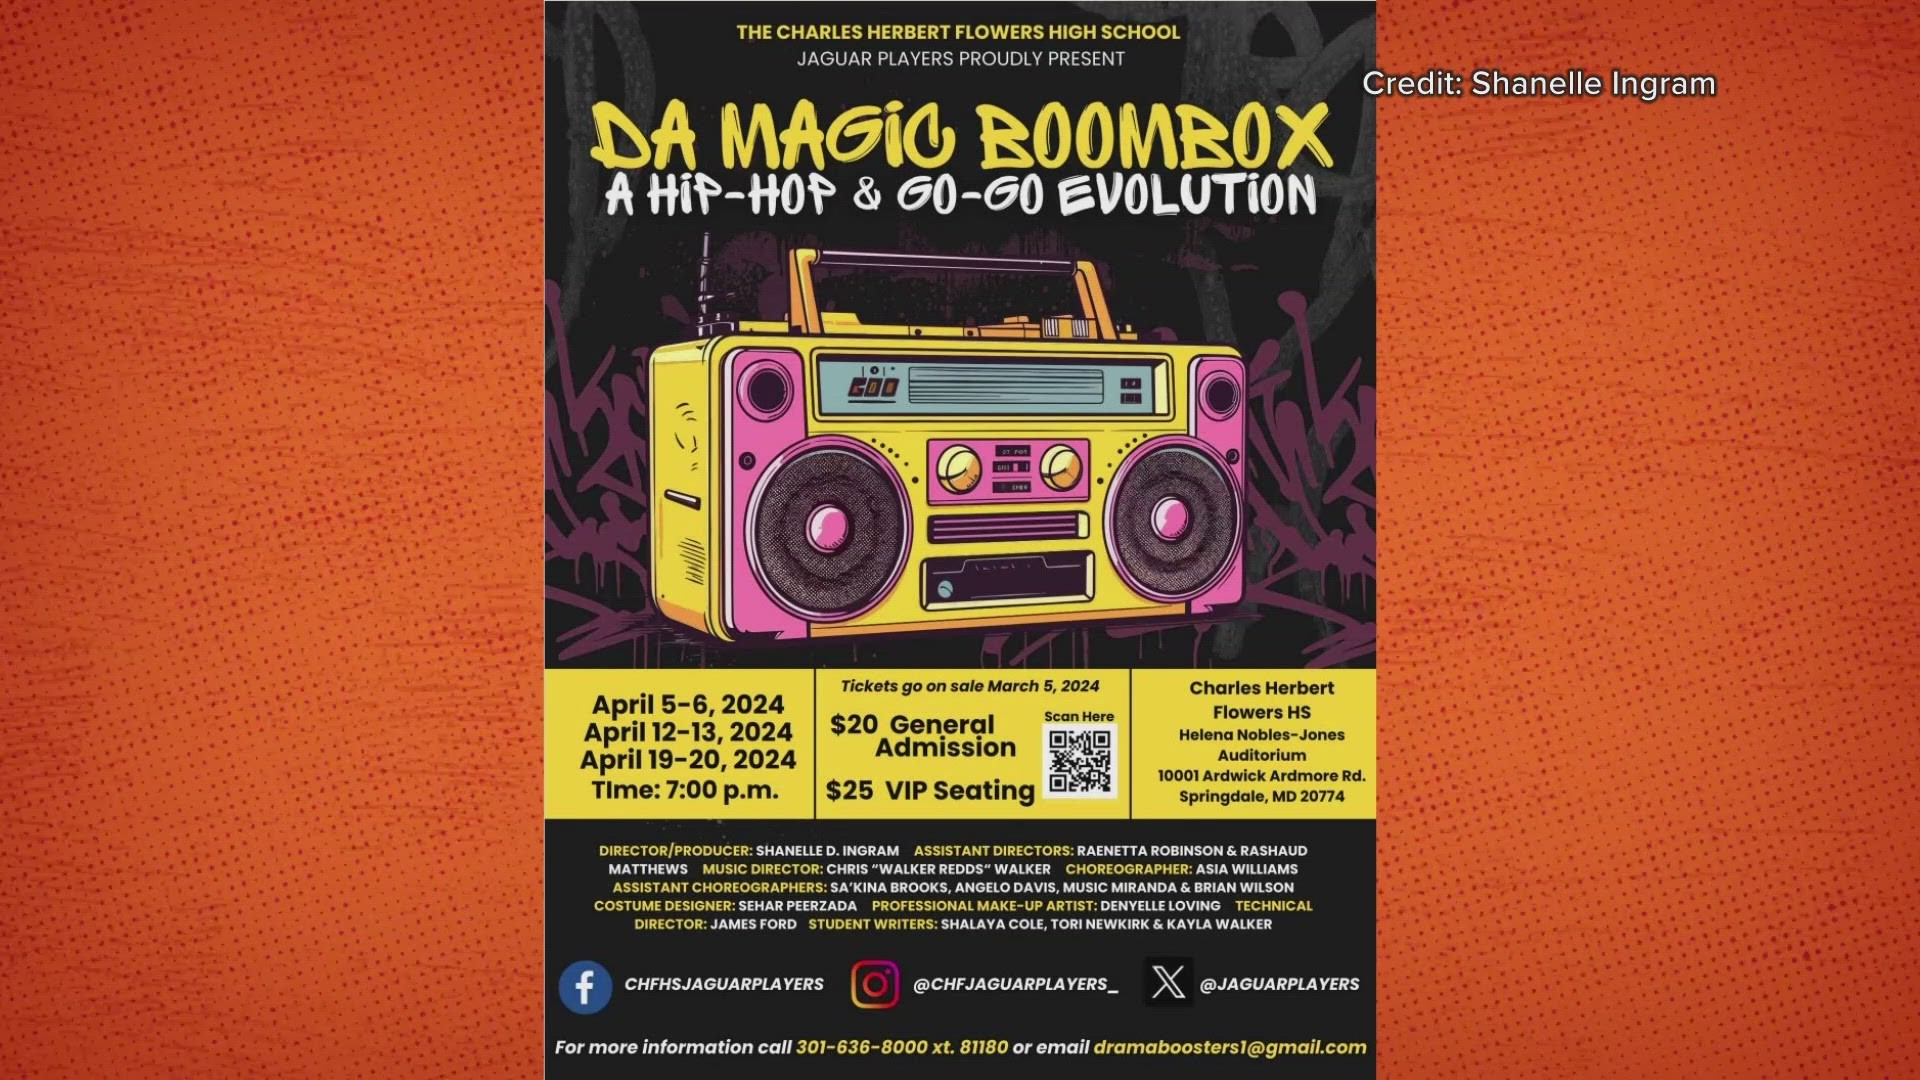 This year's production, 'Da Magic Boombox' hopes to capture DC culture through music and dance